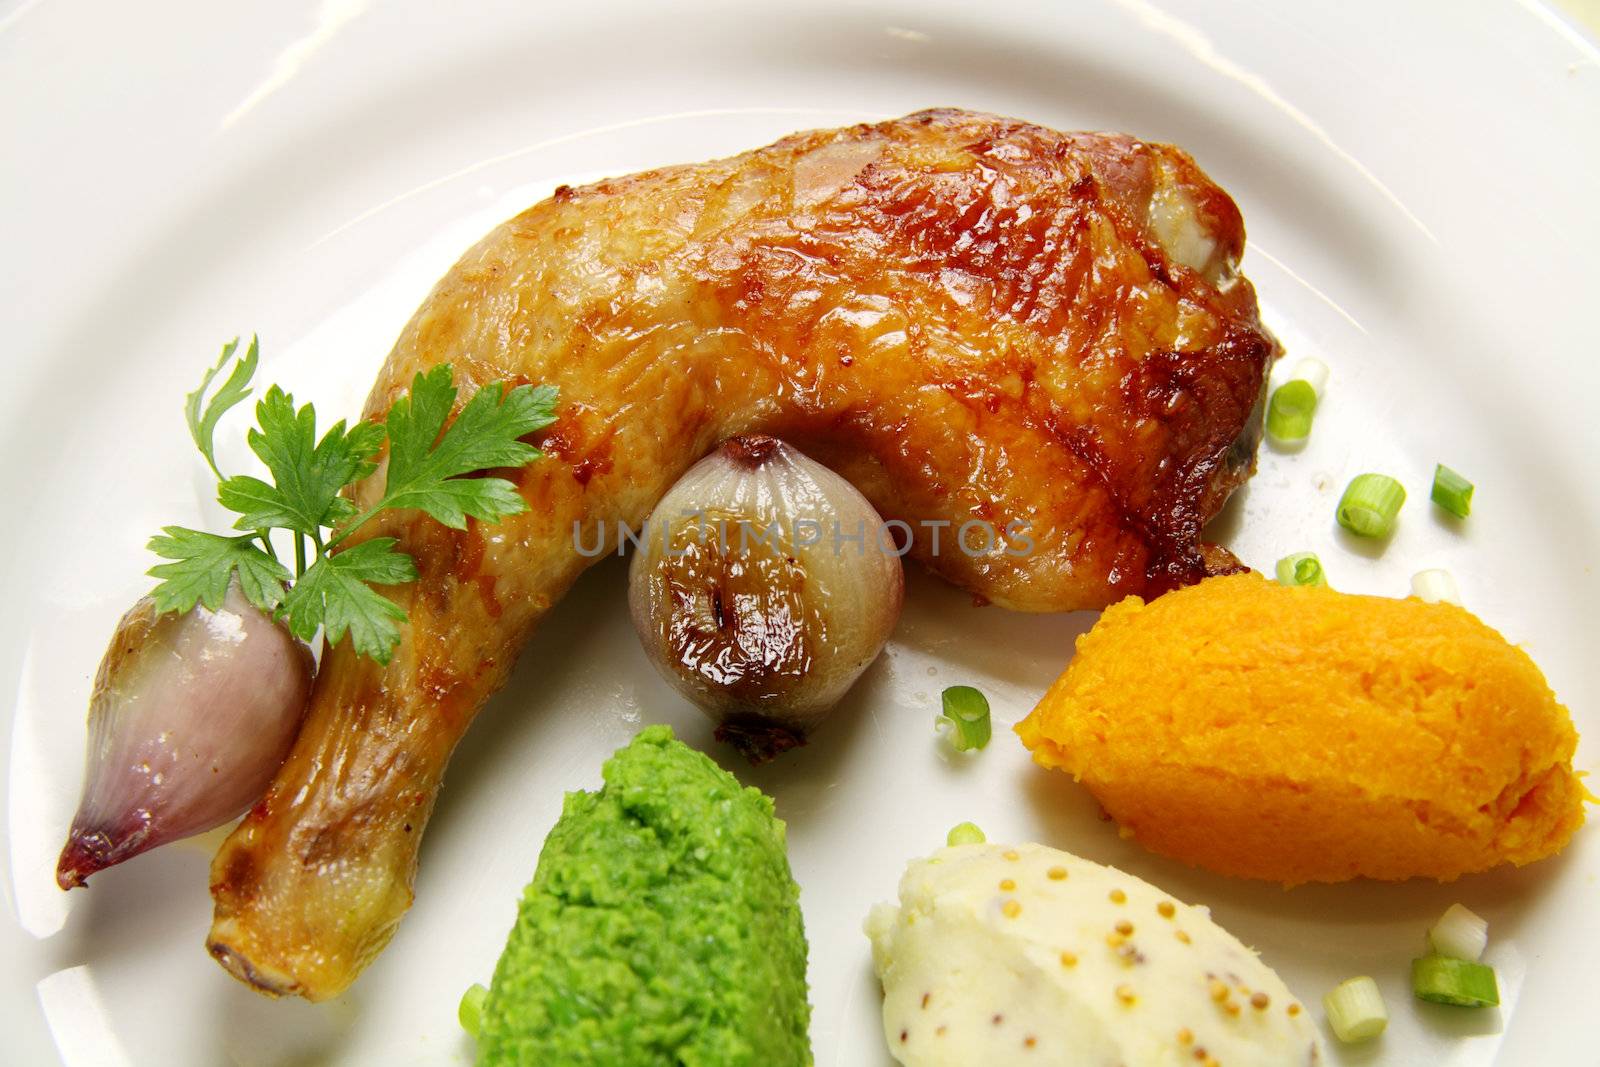 Roasted quarter of chicken with a pea, potato and butternut mash.